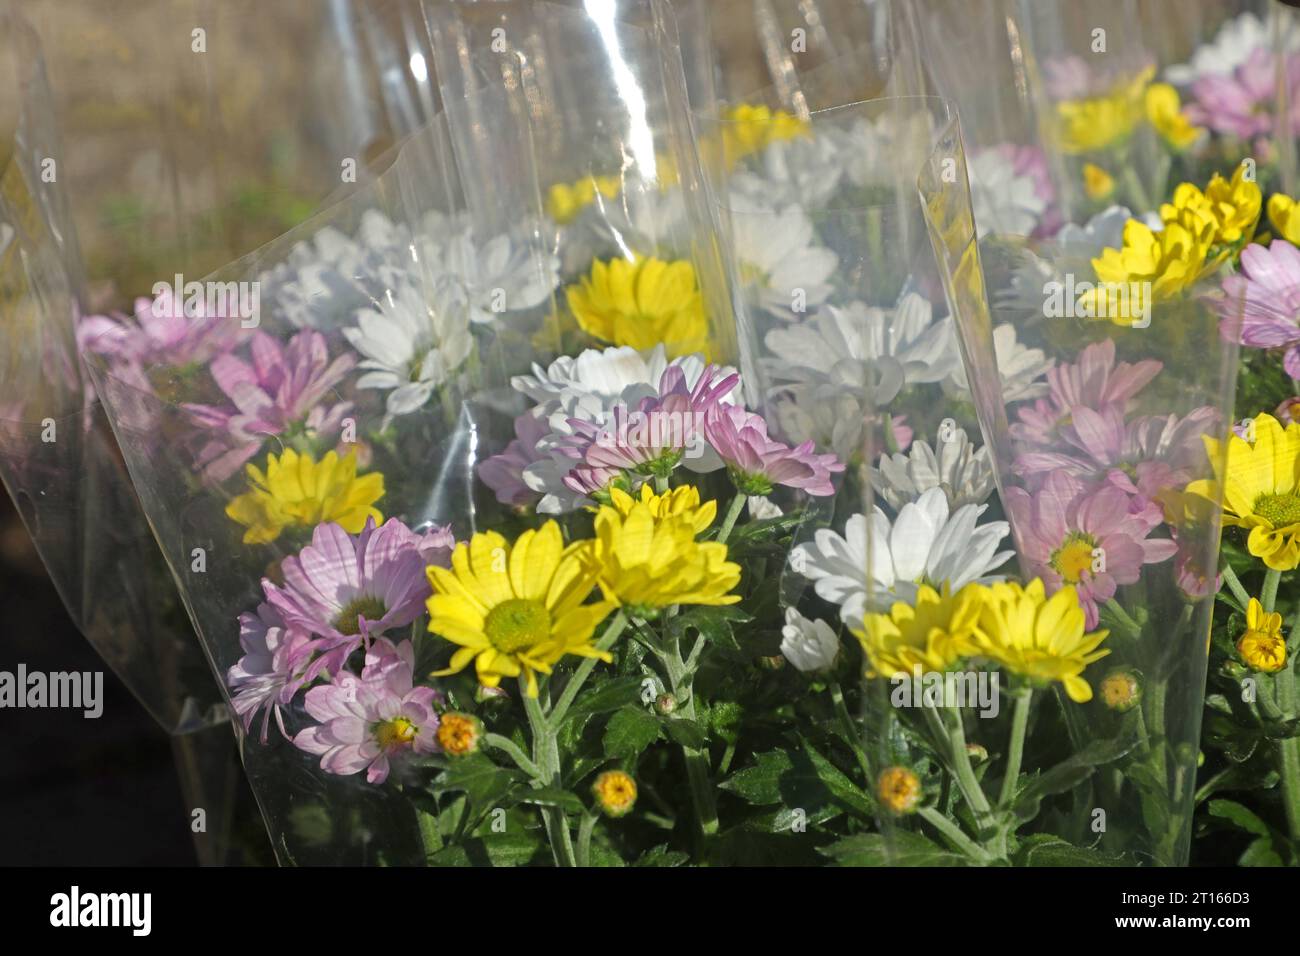 Astern in Plastikverpackung Astern zur Blütezeit zur Pflanzung, die in transparenter umweltschädlicher Kunststofffolie verpackt wurden. *** Asters in plastic packaging Asters at flowering time for planting, which were packed in transparent plastic film harmful to the environment Credit: Imago/Alamy Live News Stock Photo